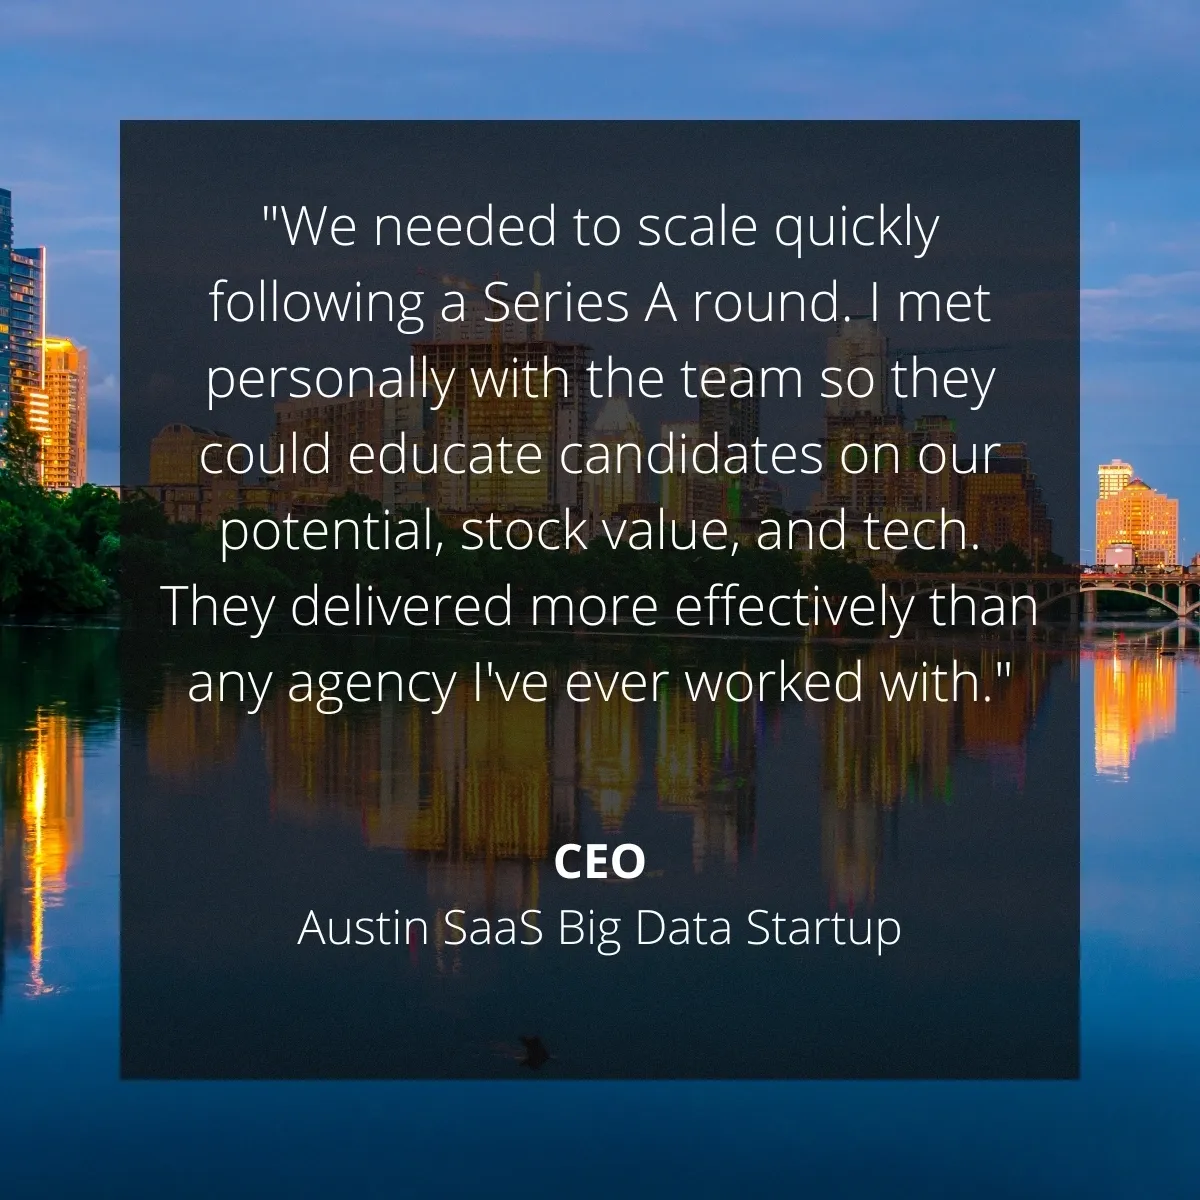 A quote from the ceo of austin saas big data startup.